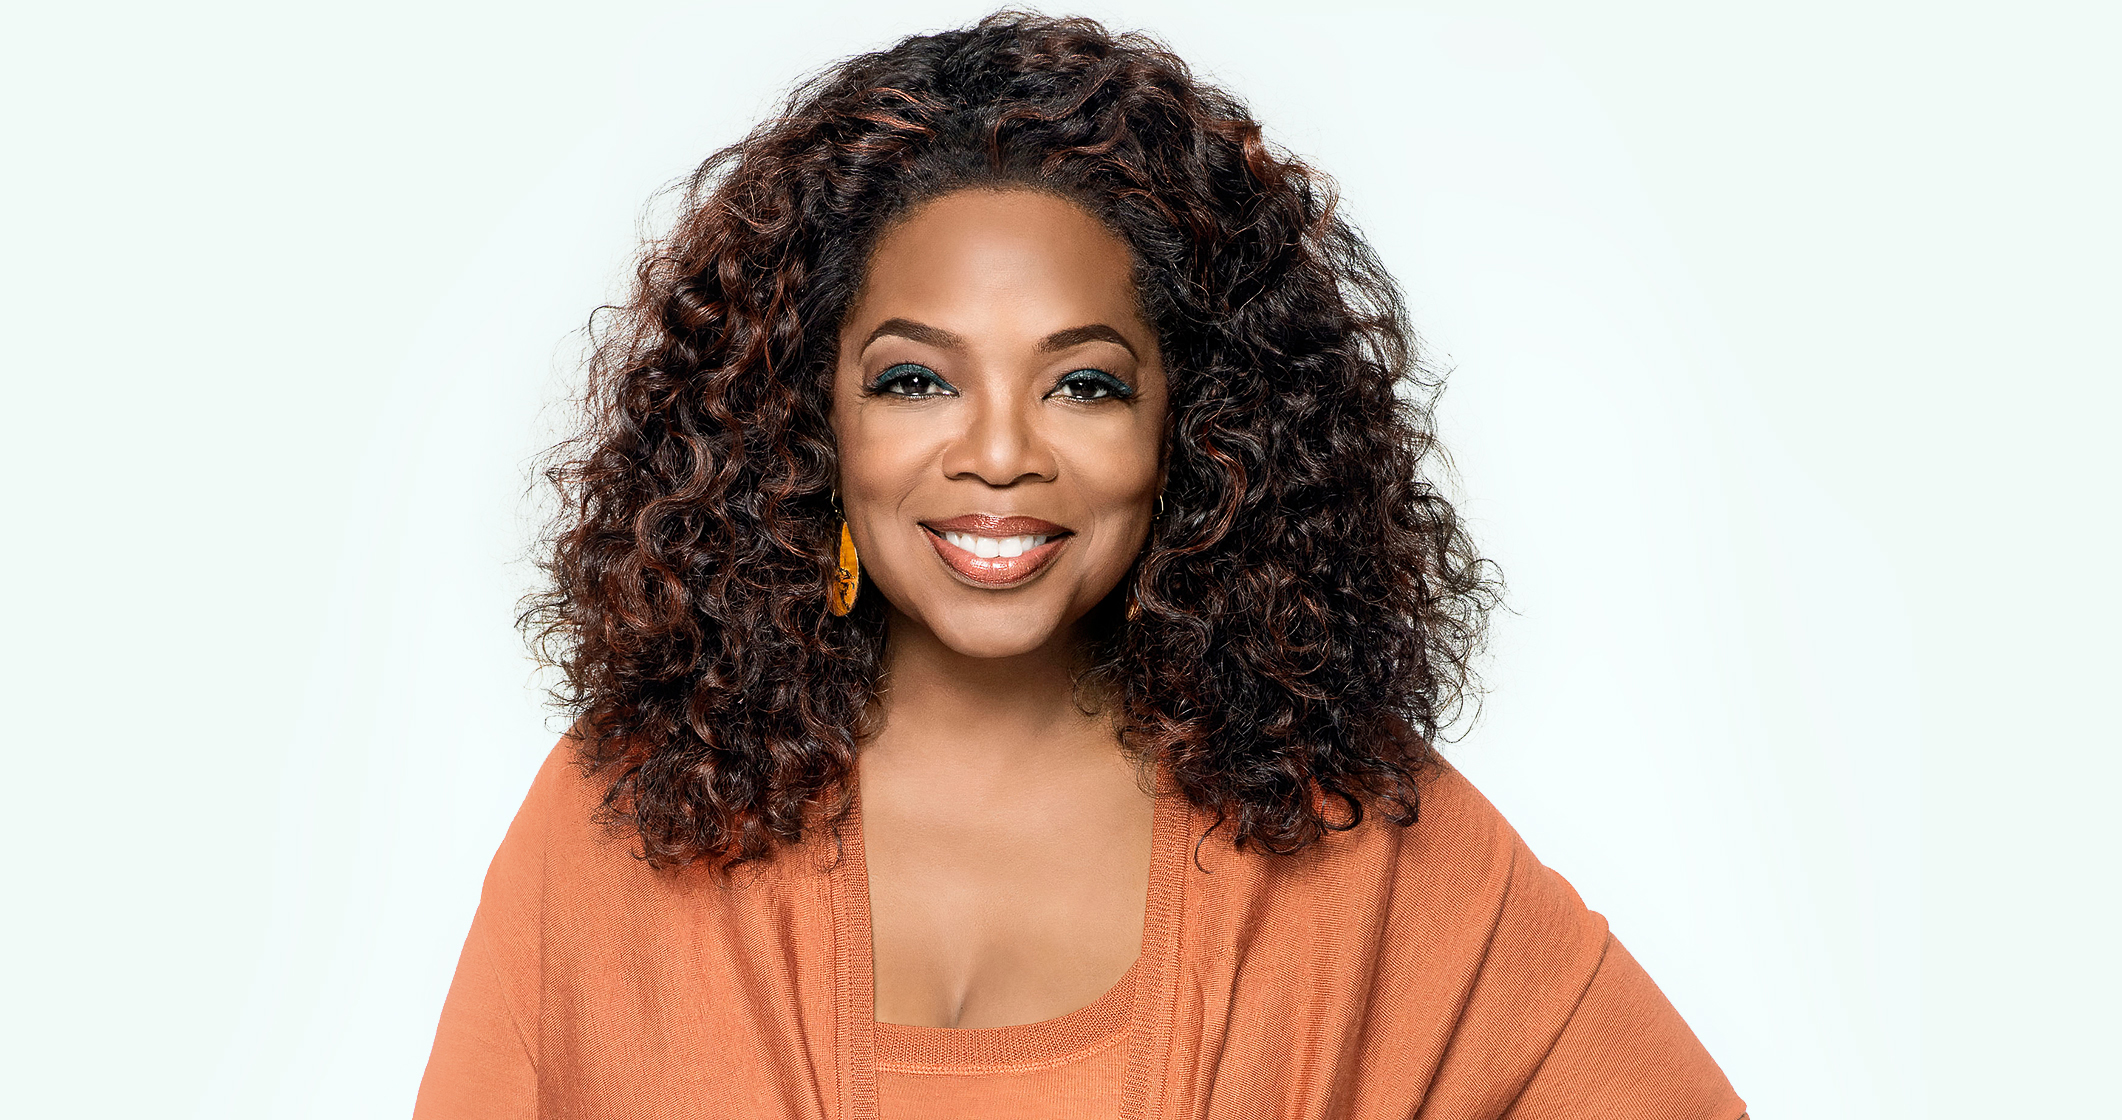 Oprah Reflects On Fighting For Equal Pay: ‘I Knew My Value’